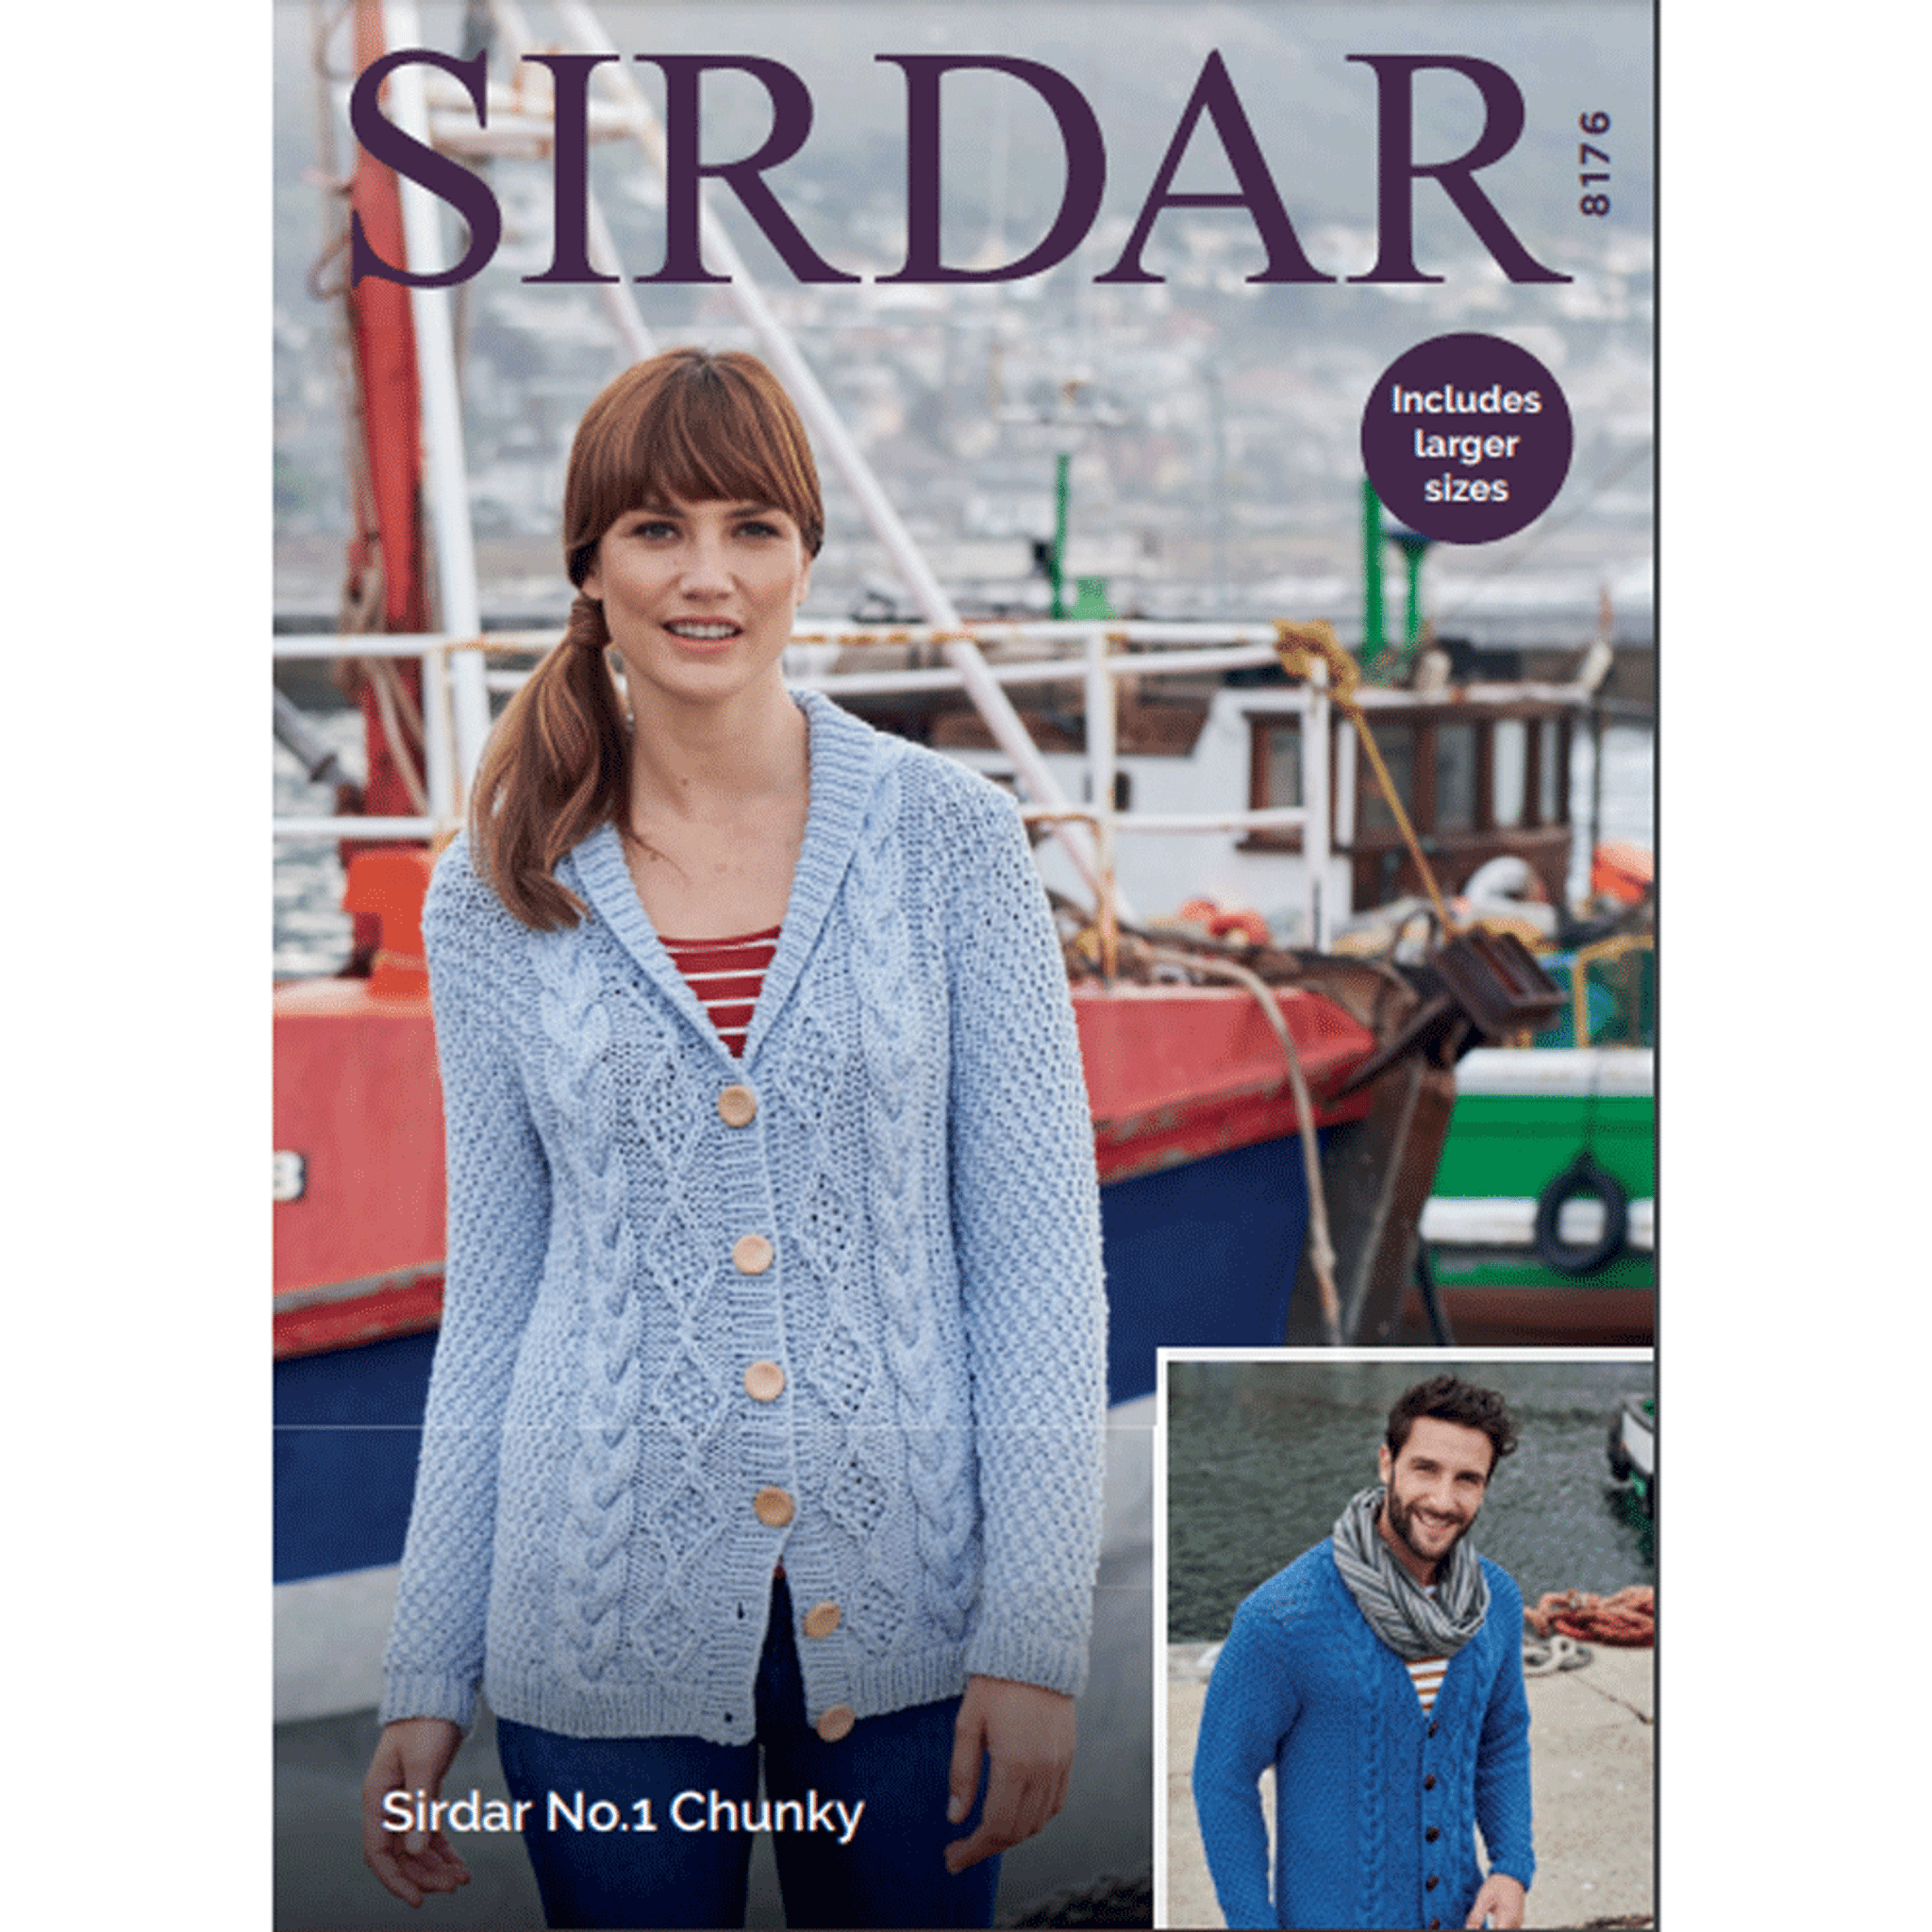 His And Hers Cardigan Knitting Pattern | Sirdar No.1 Chunky 8176 ...